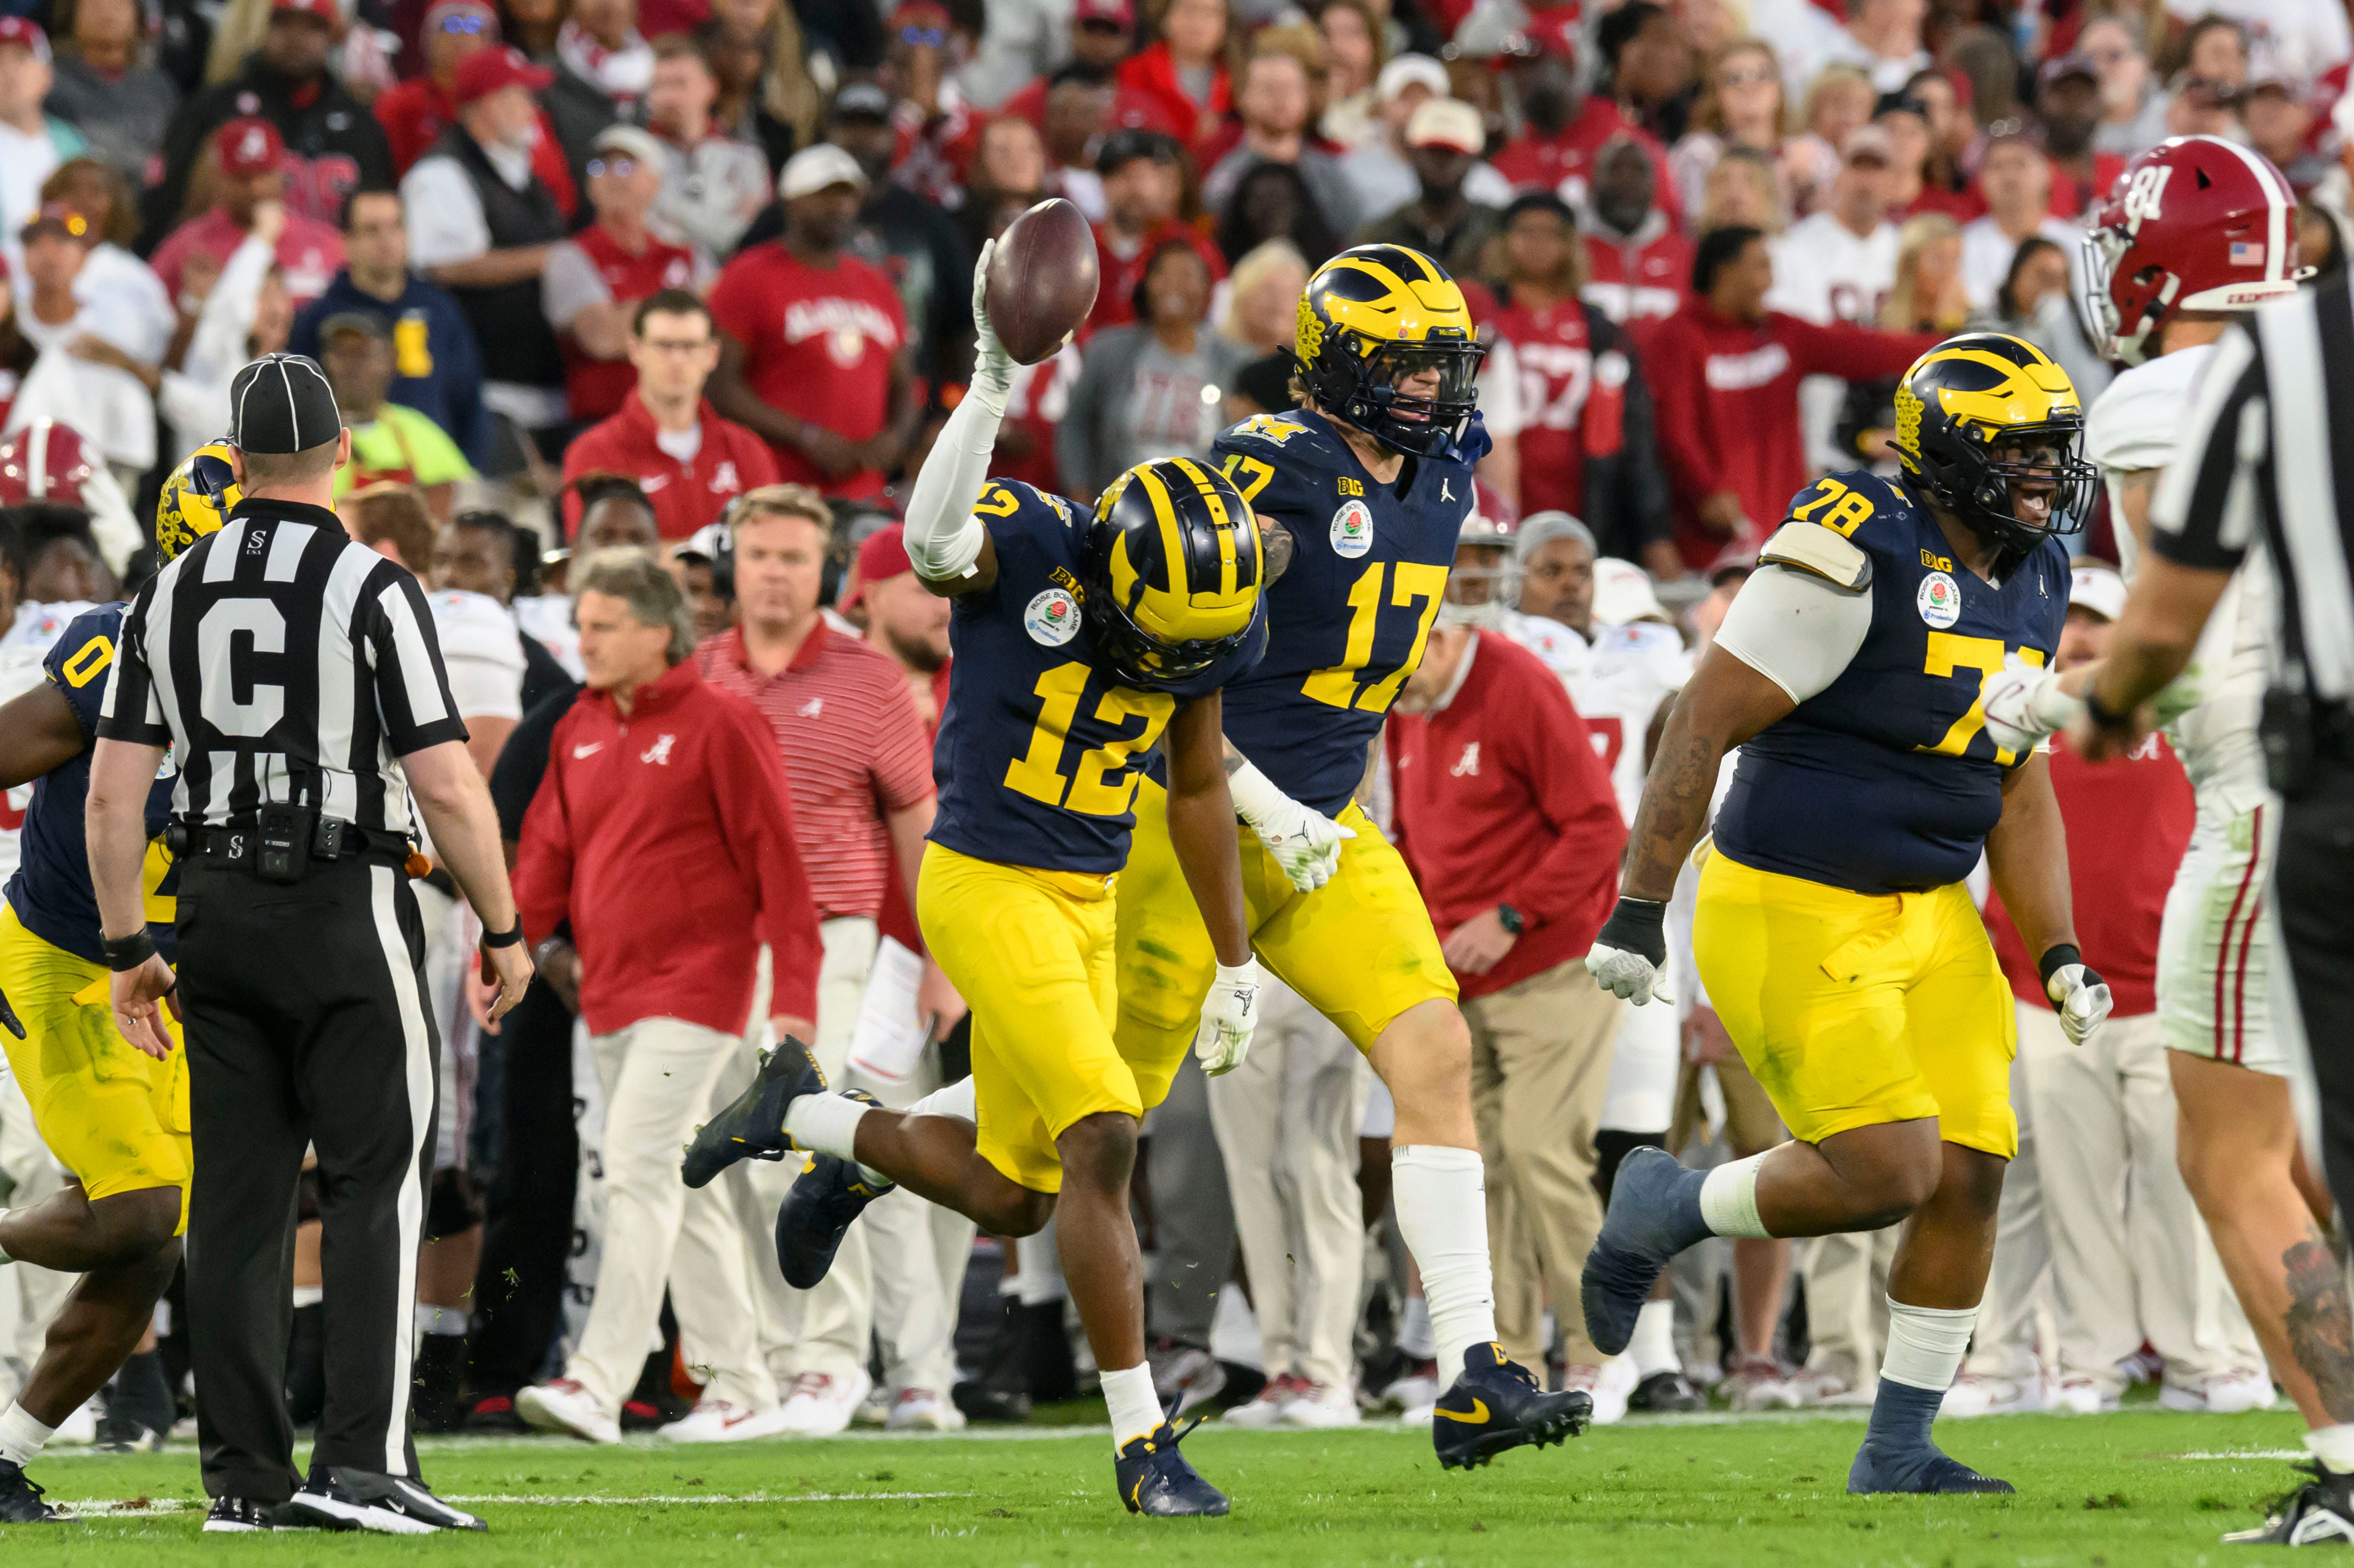 Michigan defensive back Josh Wallace celebrates after recovering an Alabama fumble during the fourth quarter of the Rose Bowl, in Pasadena, California, January 1, 2024.